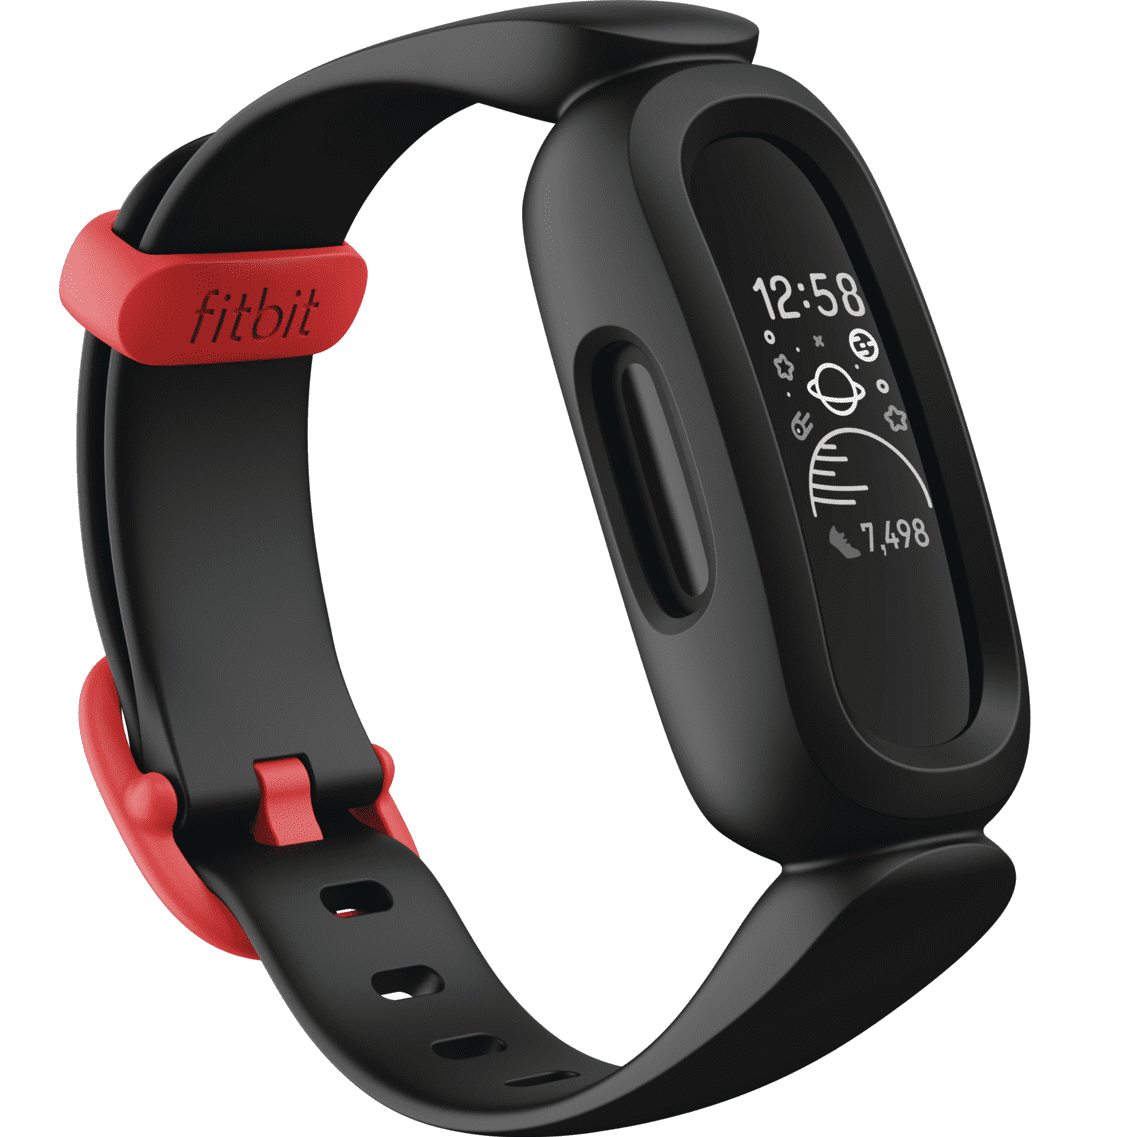 Large Black for sale online Fitbit Alta Wristband 